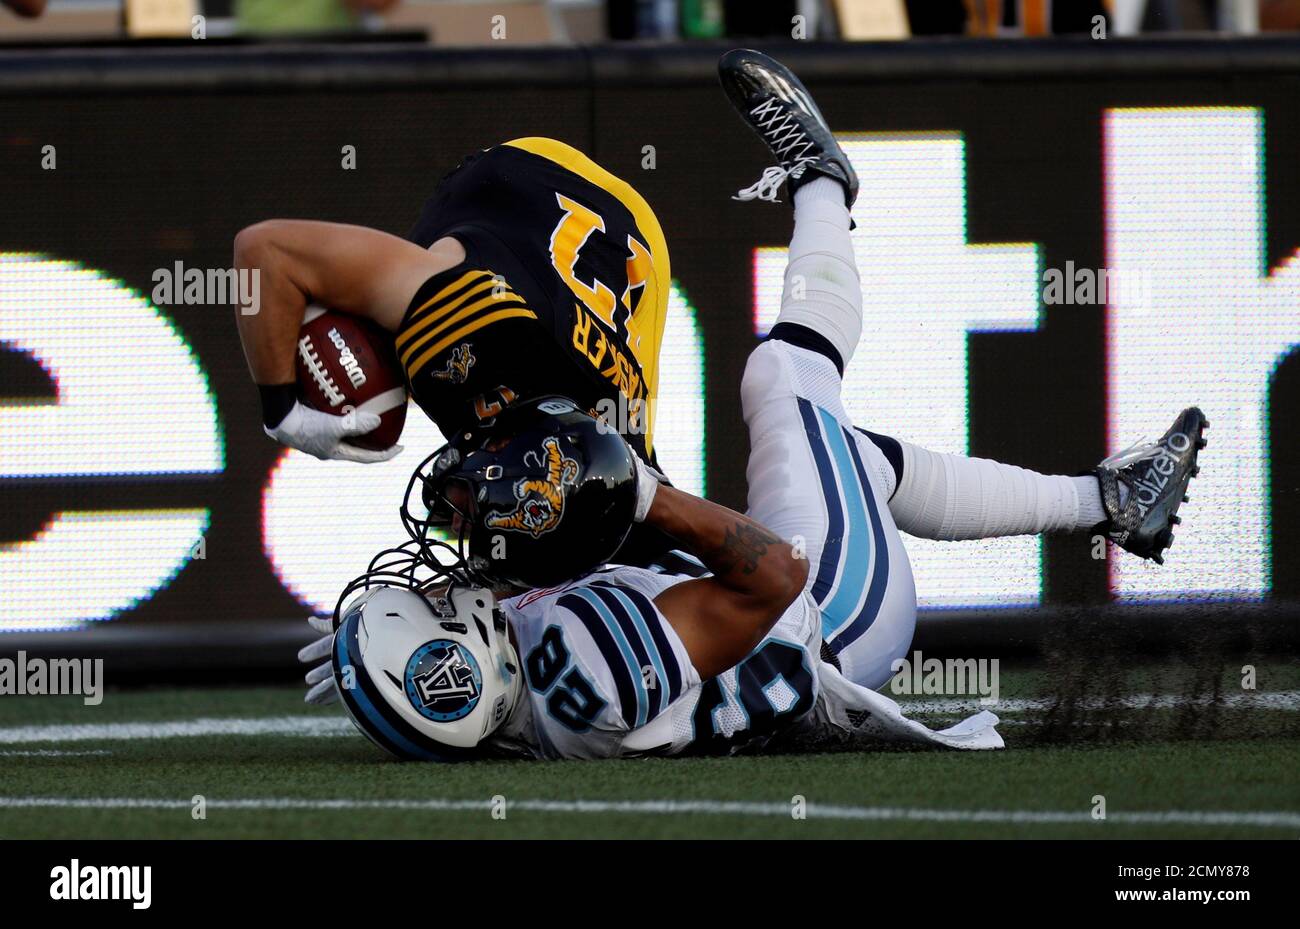 Hamilton Tiger-Cats Luke Tasker is tackled by Toronto Argonauts Joe Rankin  (R) during the first half of their CFL game in Hamilton, September 5, 2016.  REUTERS/Mark Blinch Stock Photo - Alamy